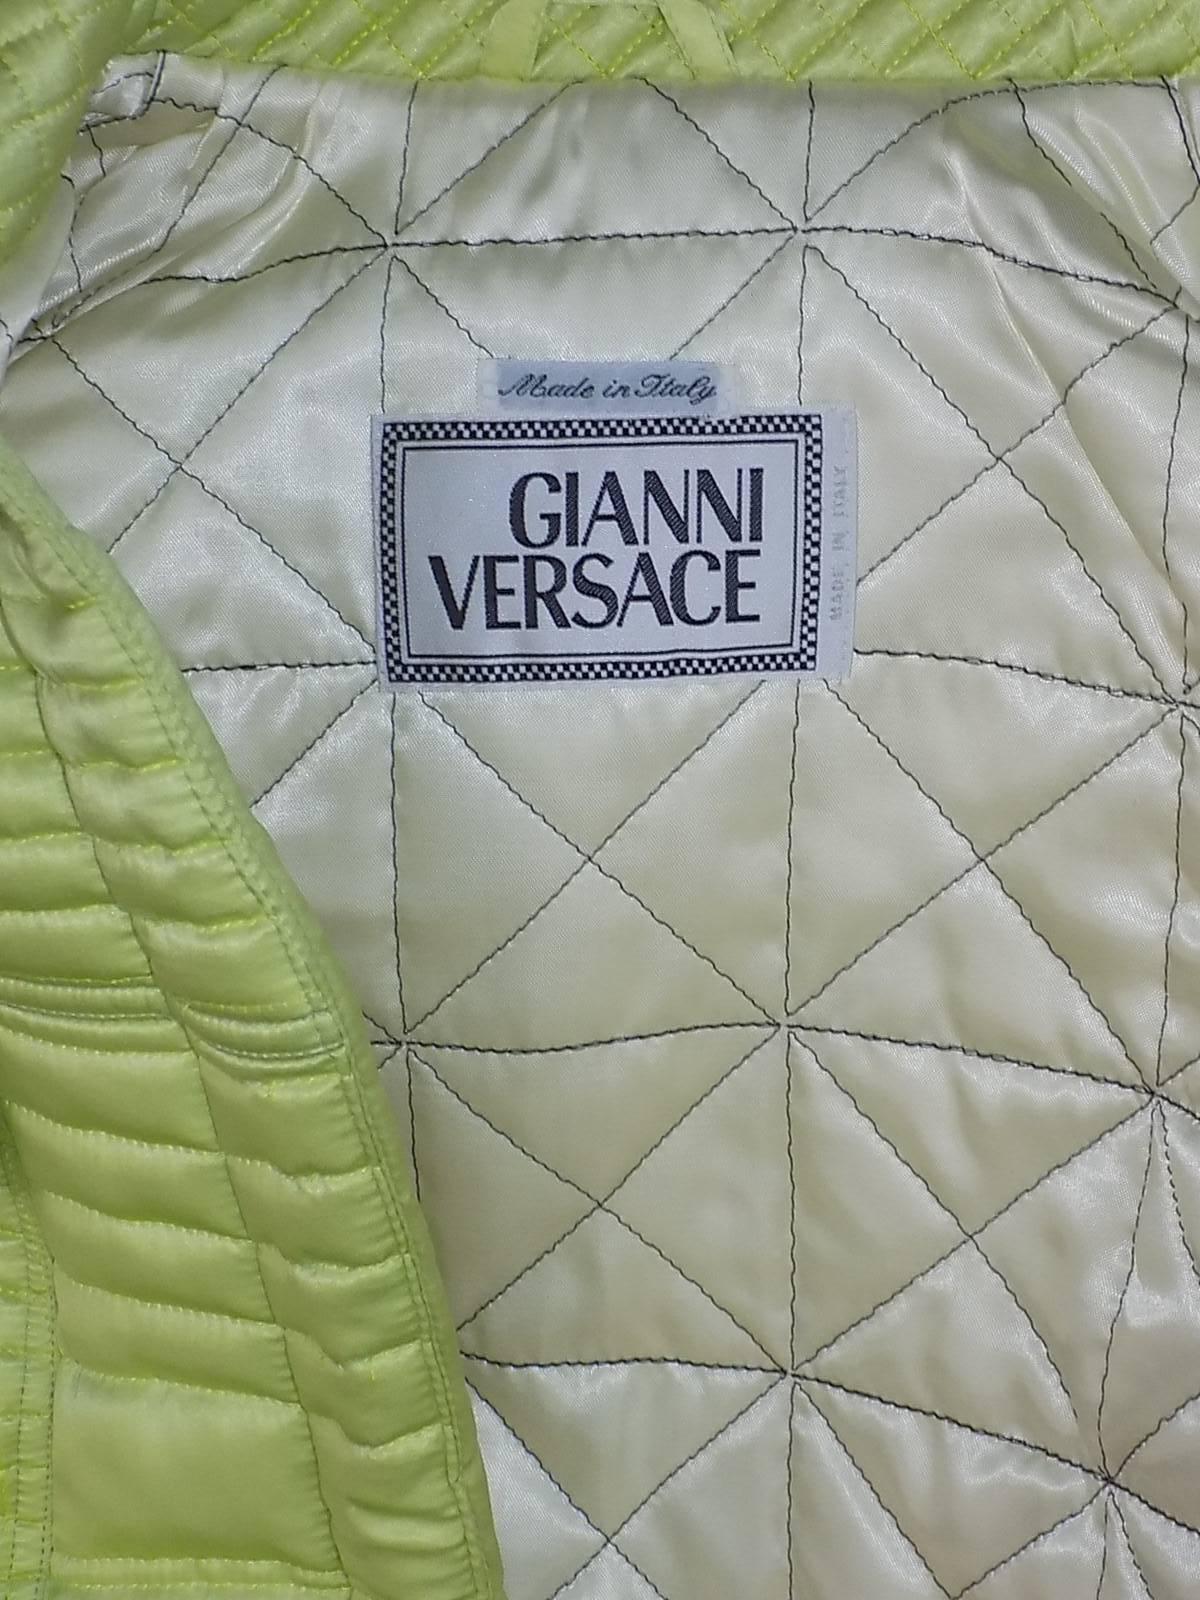 Gianni Versace's most famous Fall 1992 collection satin pufer vest very rare ! 4